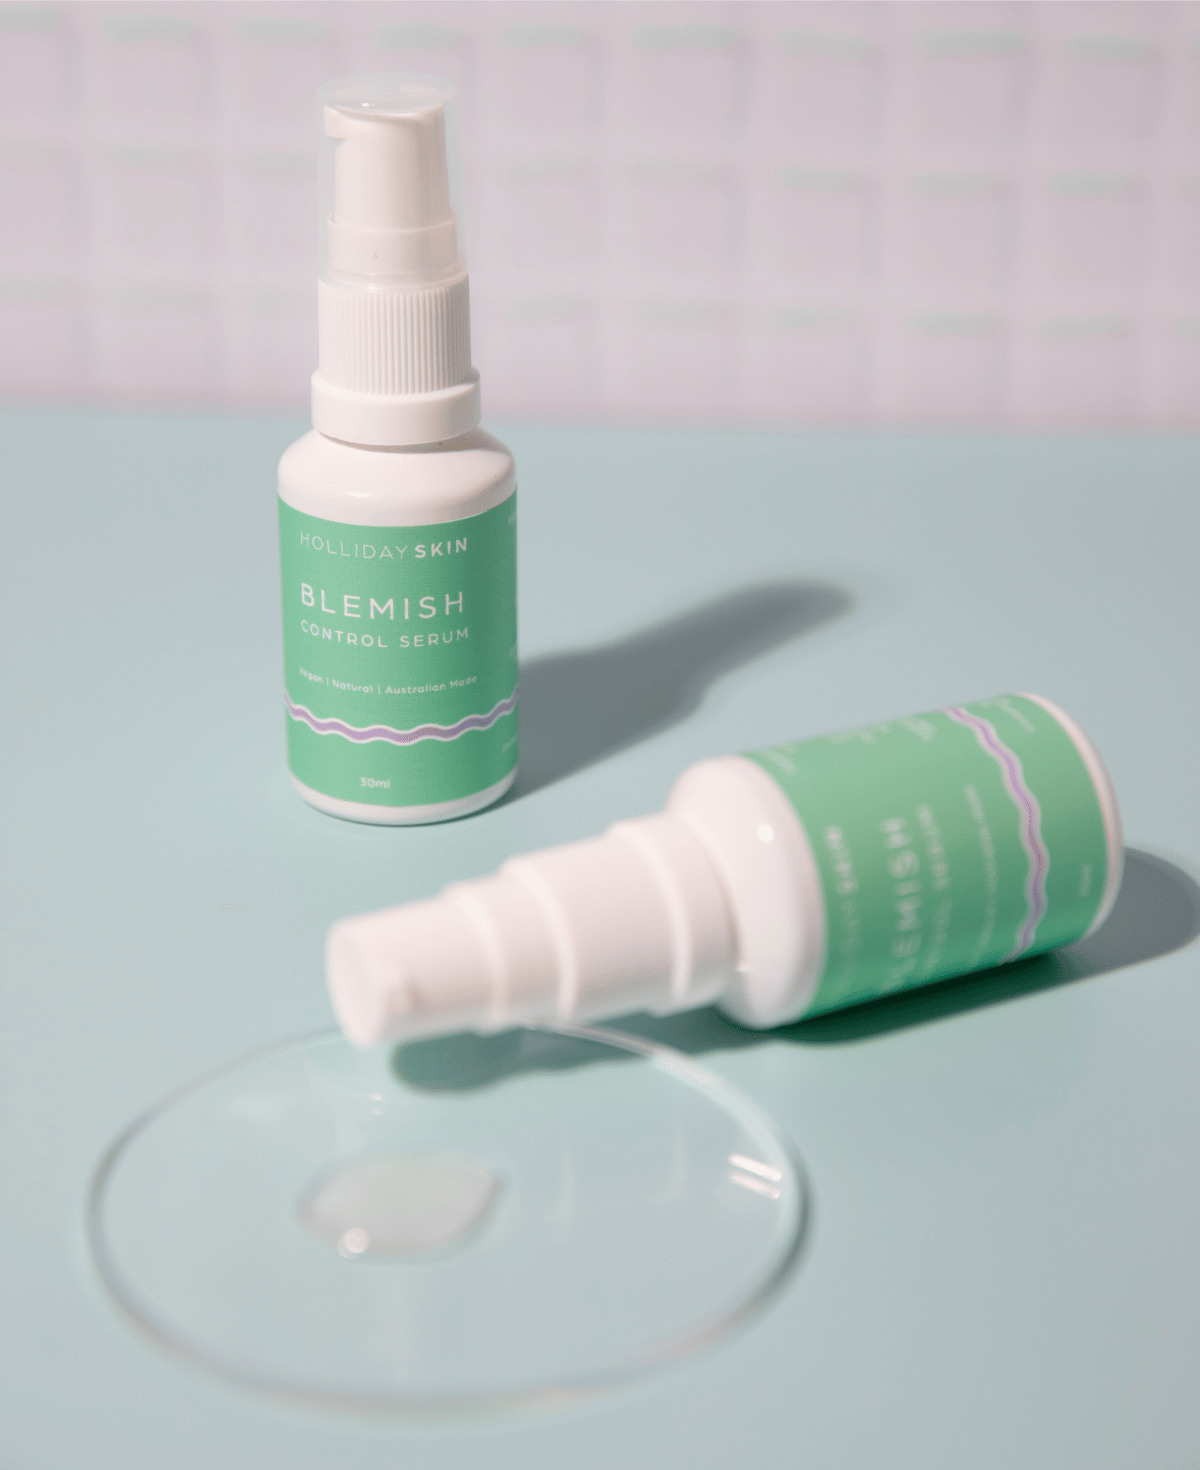 Blemish Control Serum for blackheads and pimples